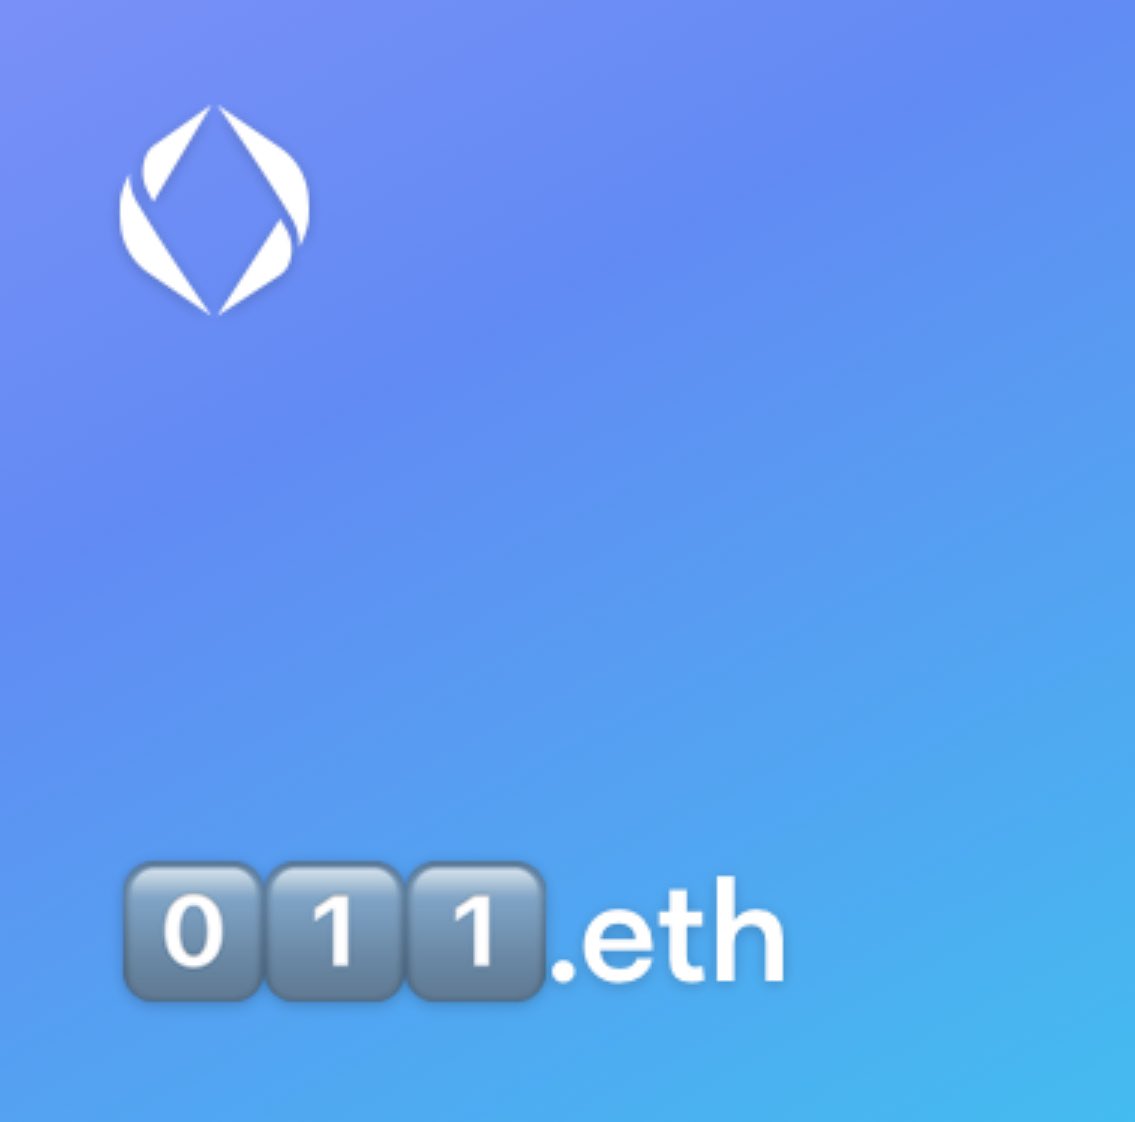 Ethmoji ENS > Digits 

Cherry on top is I don’t have to leave the Ethmoji ecosystem to own digits 0️⃣1️⃣1️⃣.eth (and Ethmoji 9️⃣9️⃣9️⃣ are only $5 renewals) 💁‍♂️